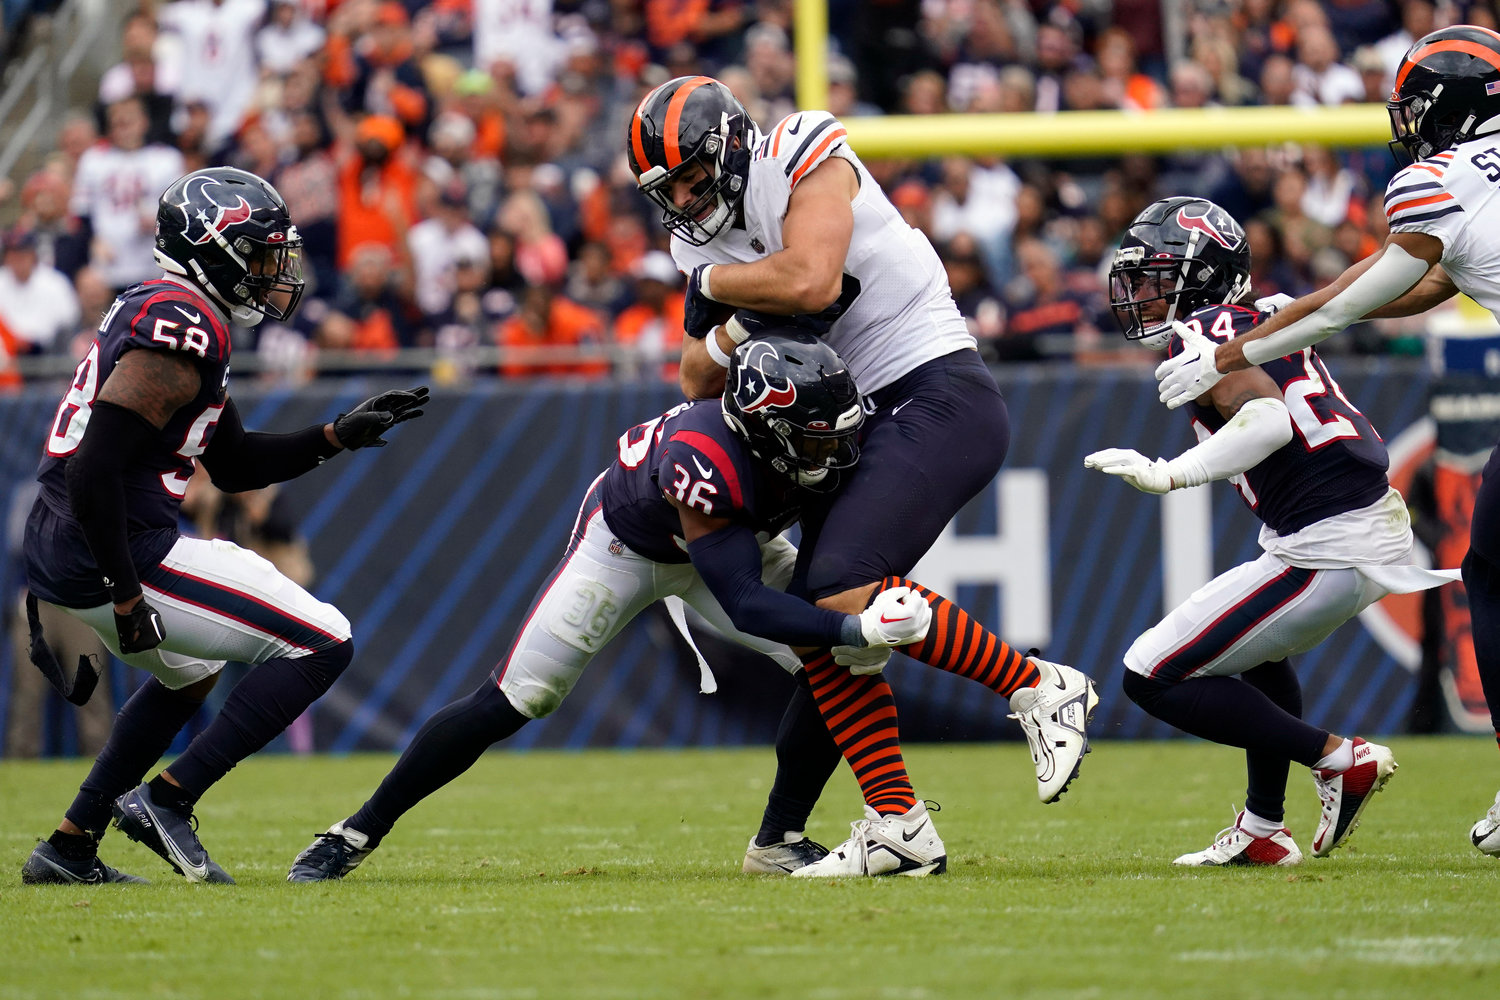 Houston Texans safety Jonathan Owens (36) tackles Chicago Bears tight end Cole Kmet during the second half of an NFL football game Sunday, Sept. 25, 2022, in Chicago.